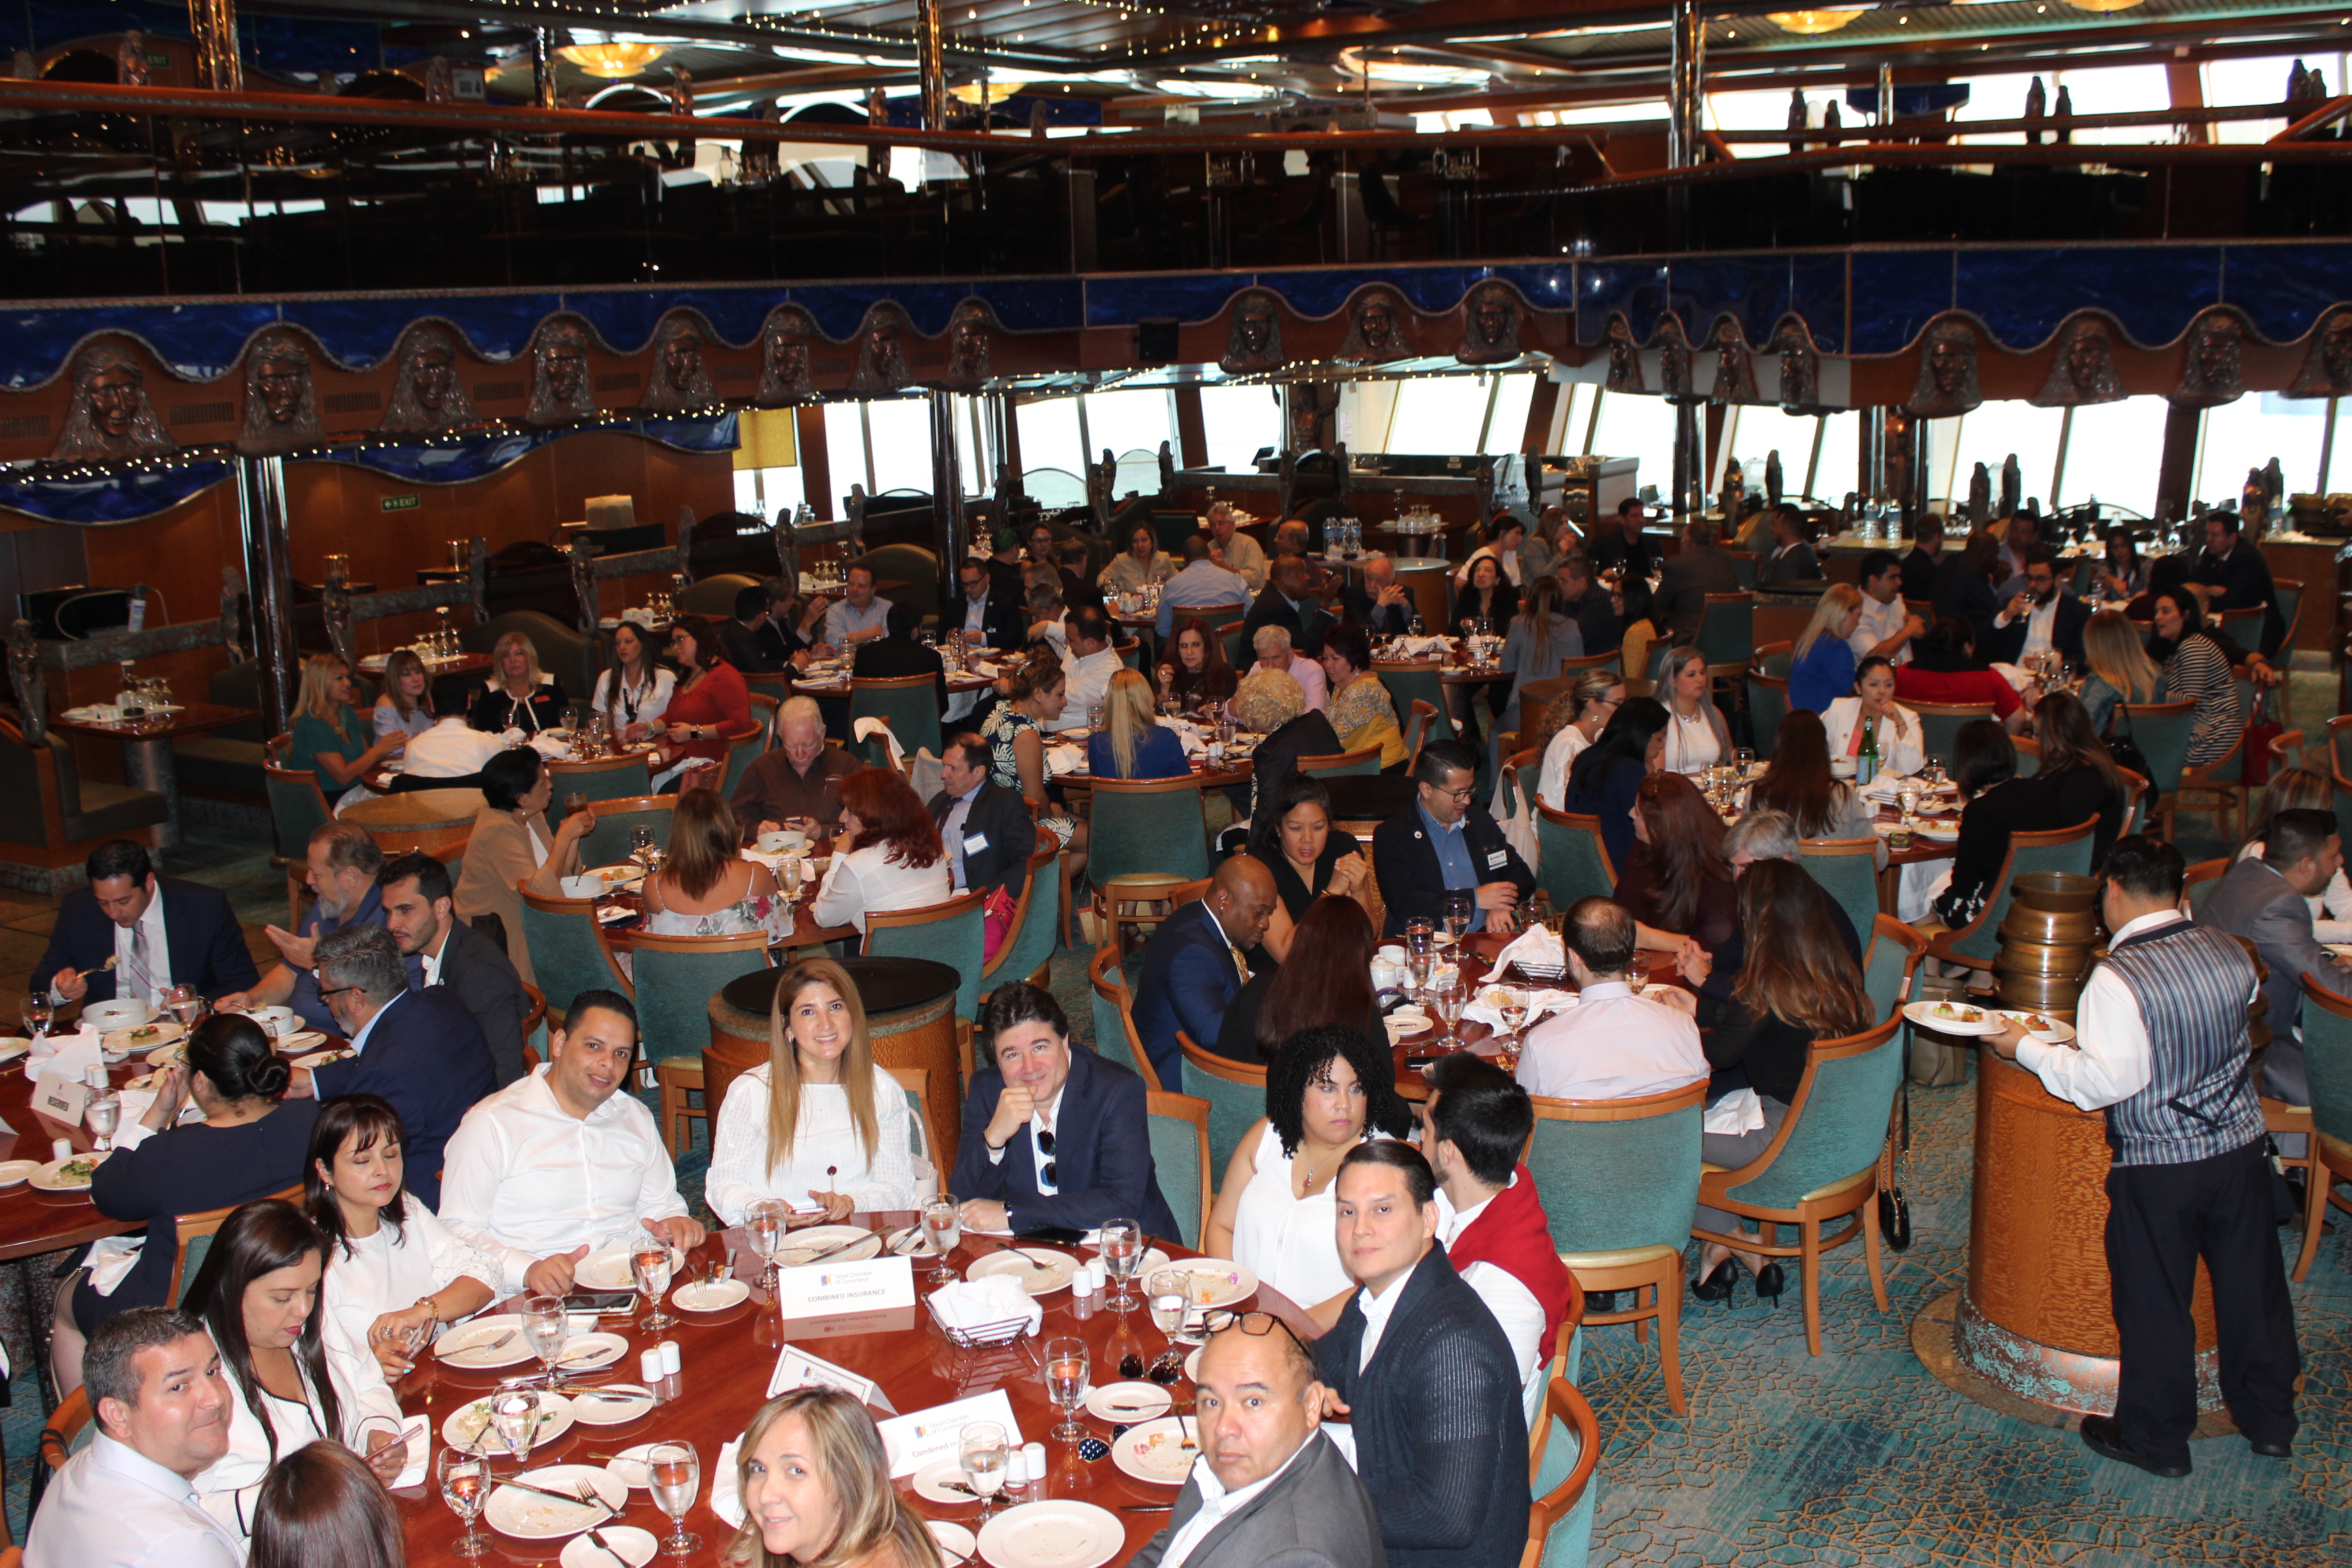 Doral Chamber of Commerce Carnival Cruise Luncheon 2019, Networking Event in Miami, Florida. The entire Dining Hall inside Carnival Cruise Victory.